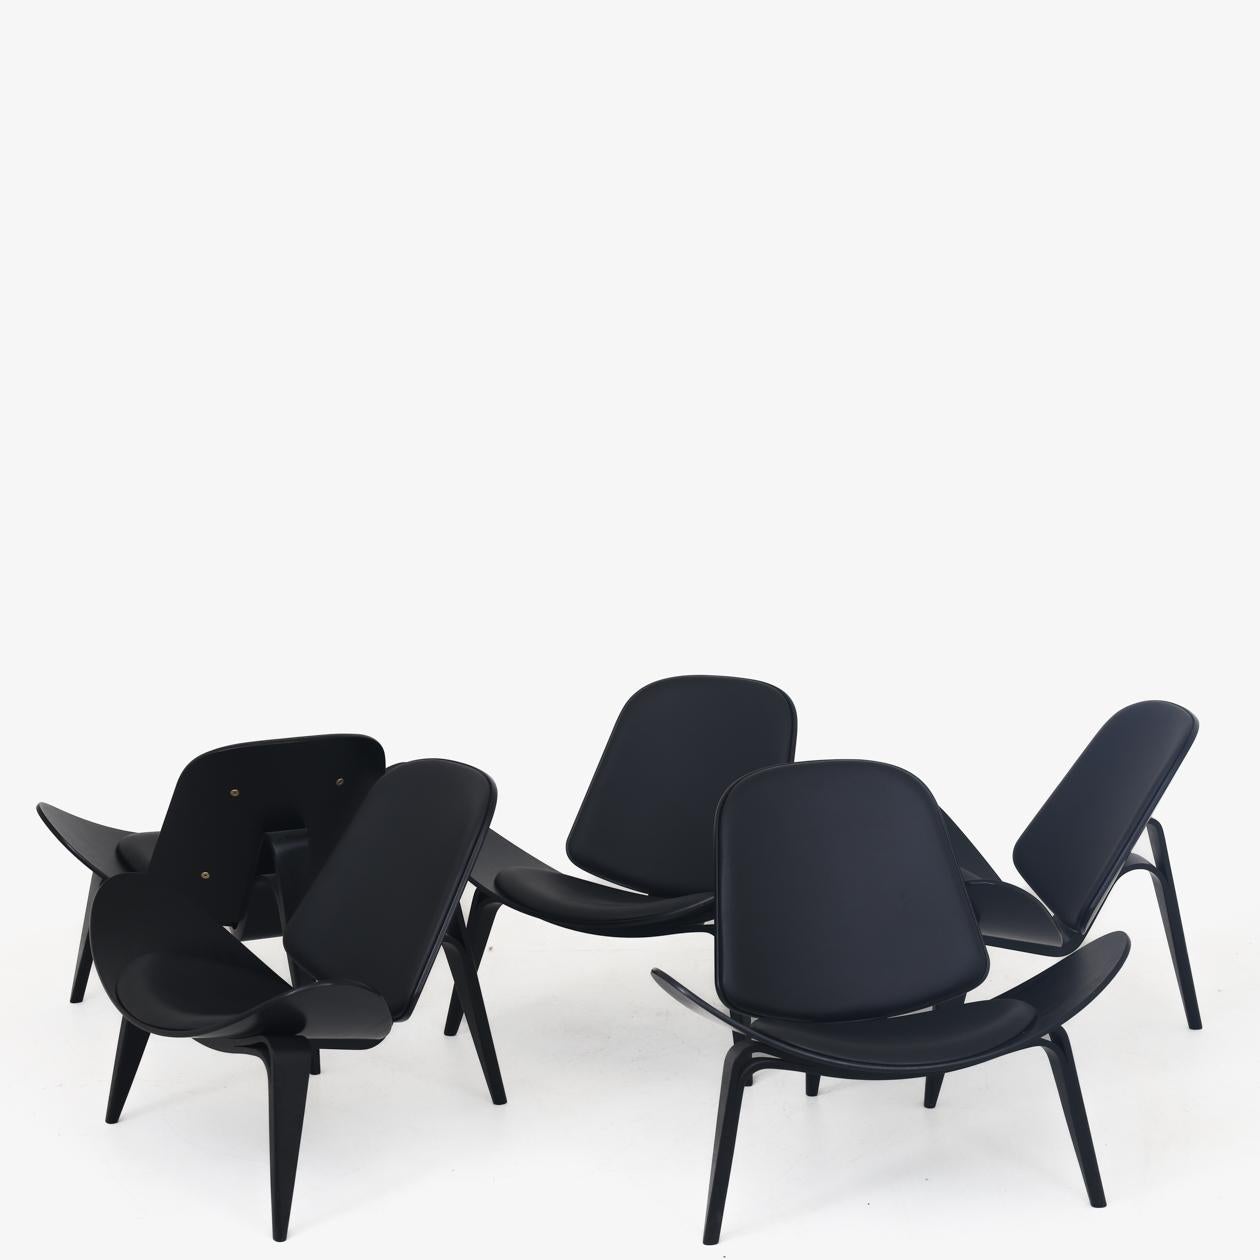 CH 07 - Shell chair in moulded, black glazed ash and black leather. Designed in 1963. 5 in stock. Hans J. Wegner / Carl Hansen.